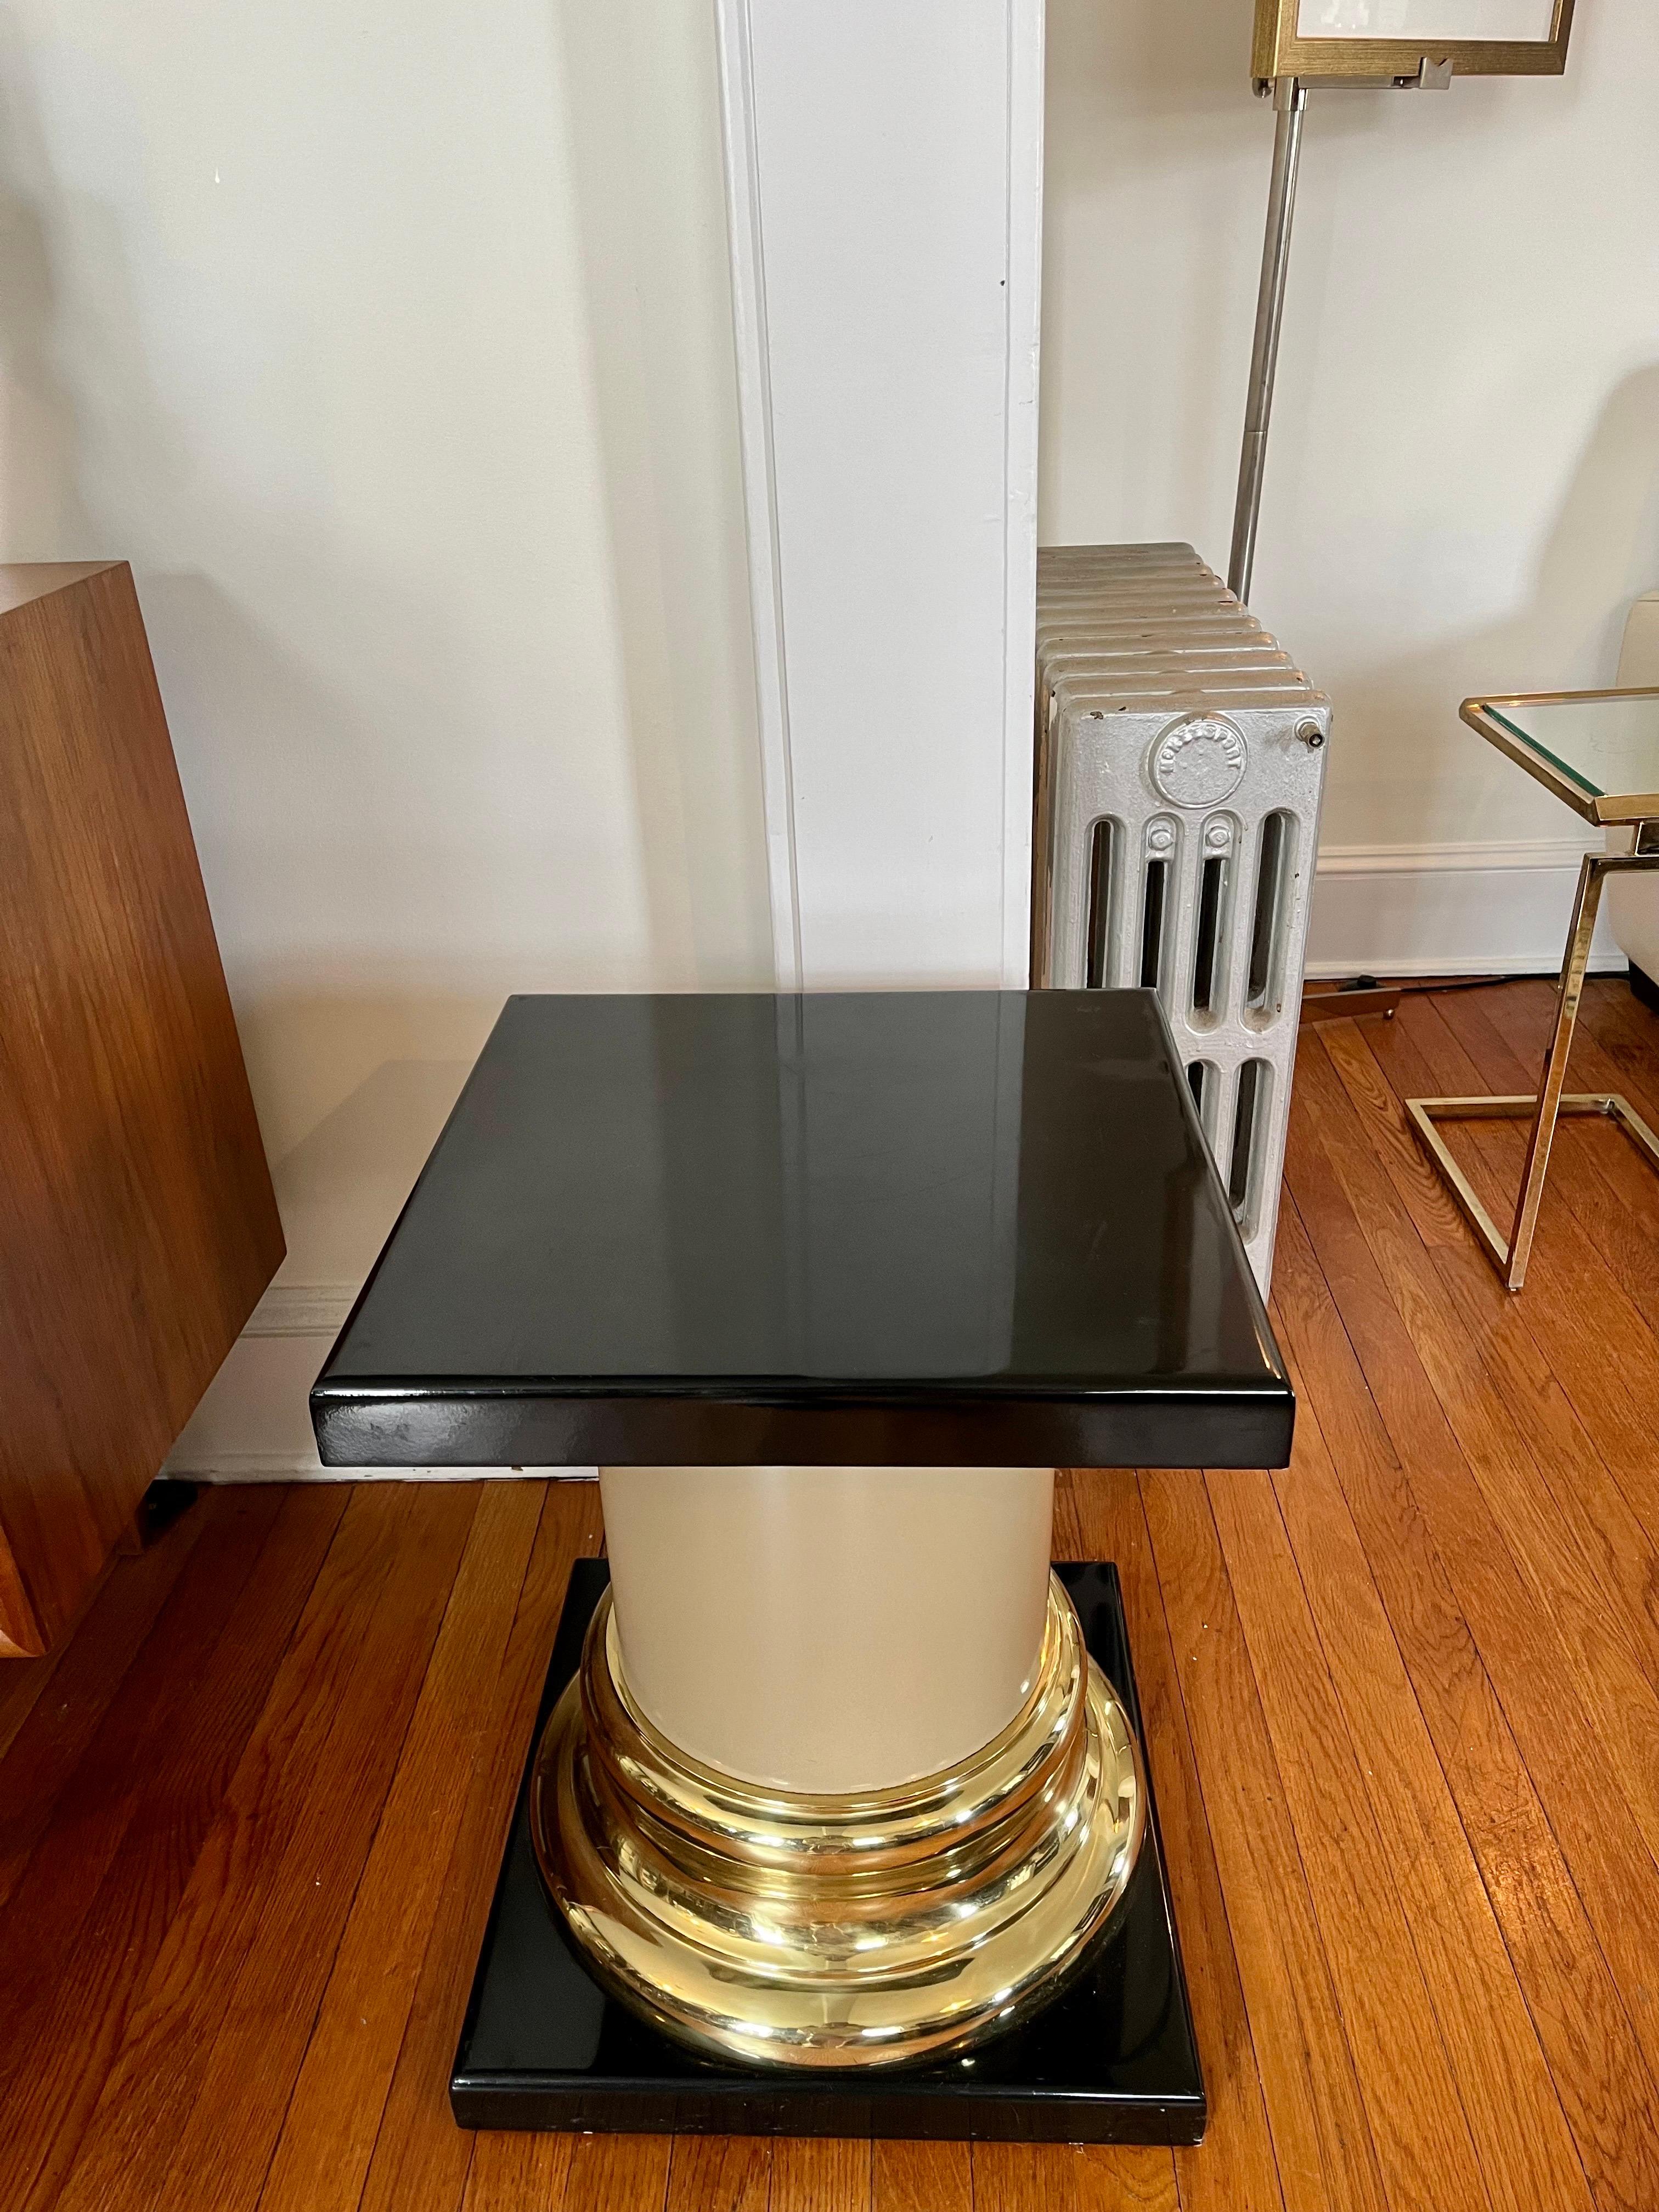 A Mid-Century Modern Mastercraft pedestal or side table with a simple Roman Tuscan column design. Featuring a smooth cylindrical latte colored resin (or ABS plastic) shaft with solid brass capital and base terminating on both ends in a satin black